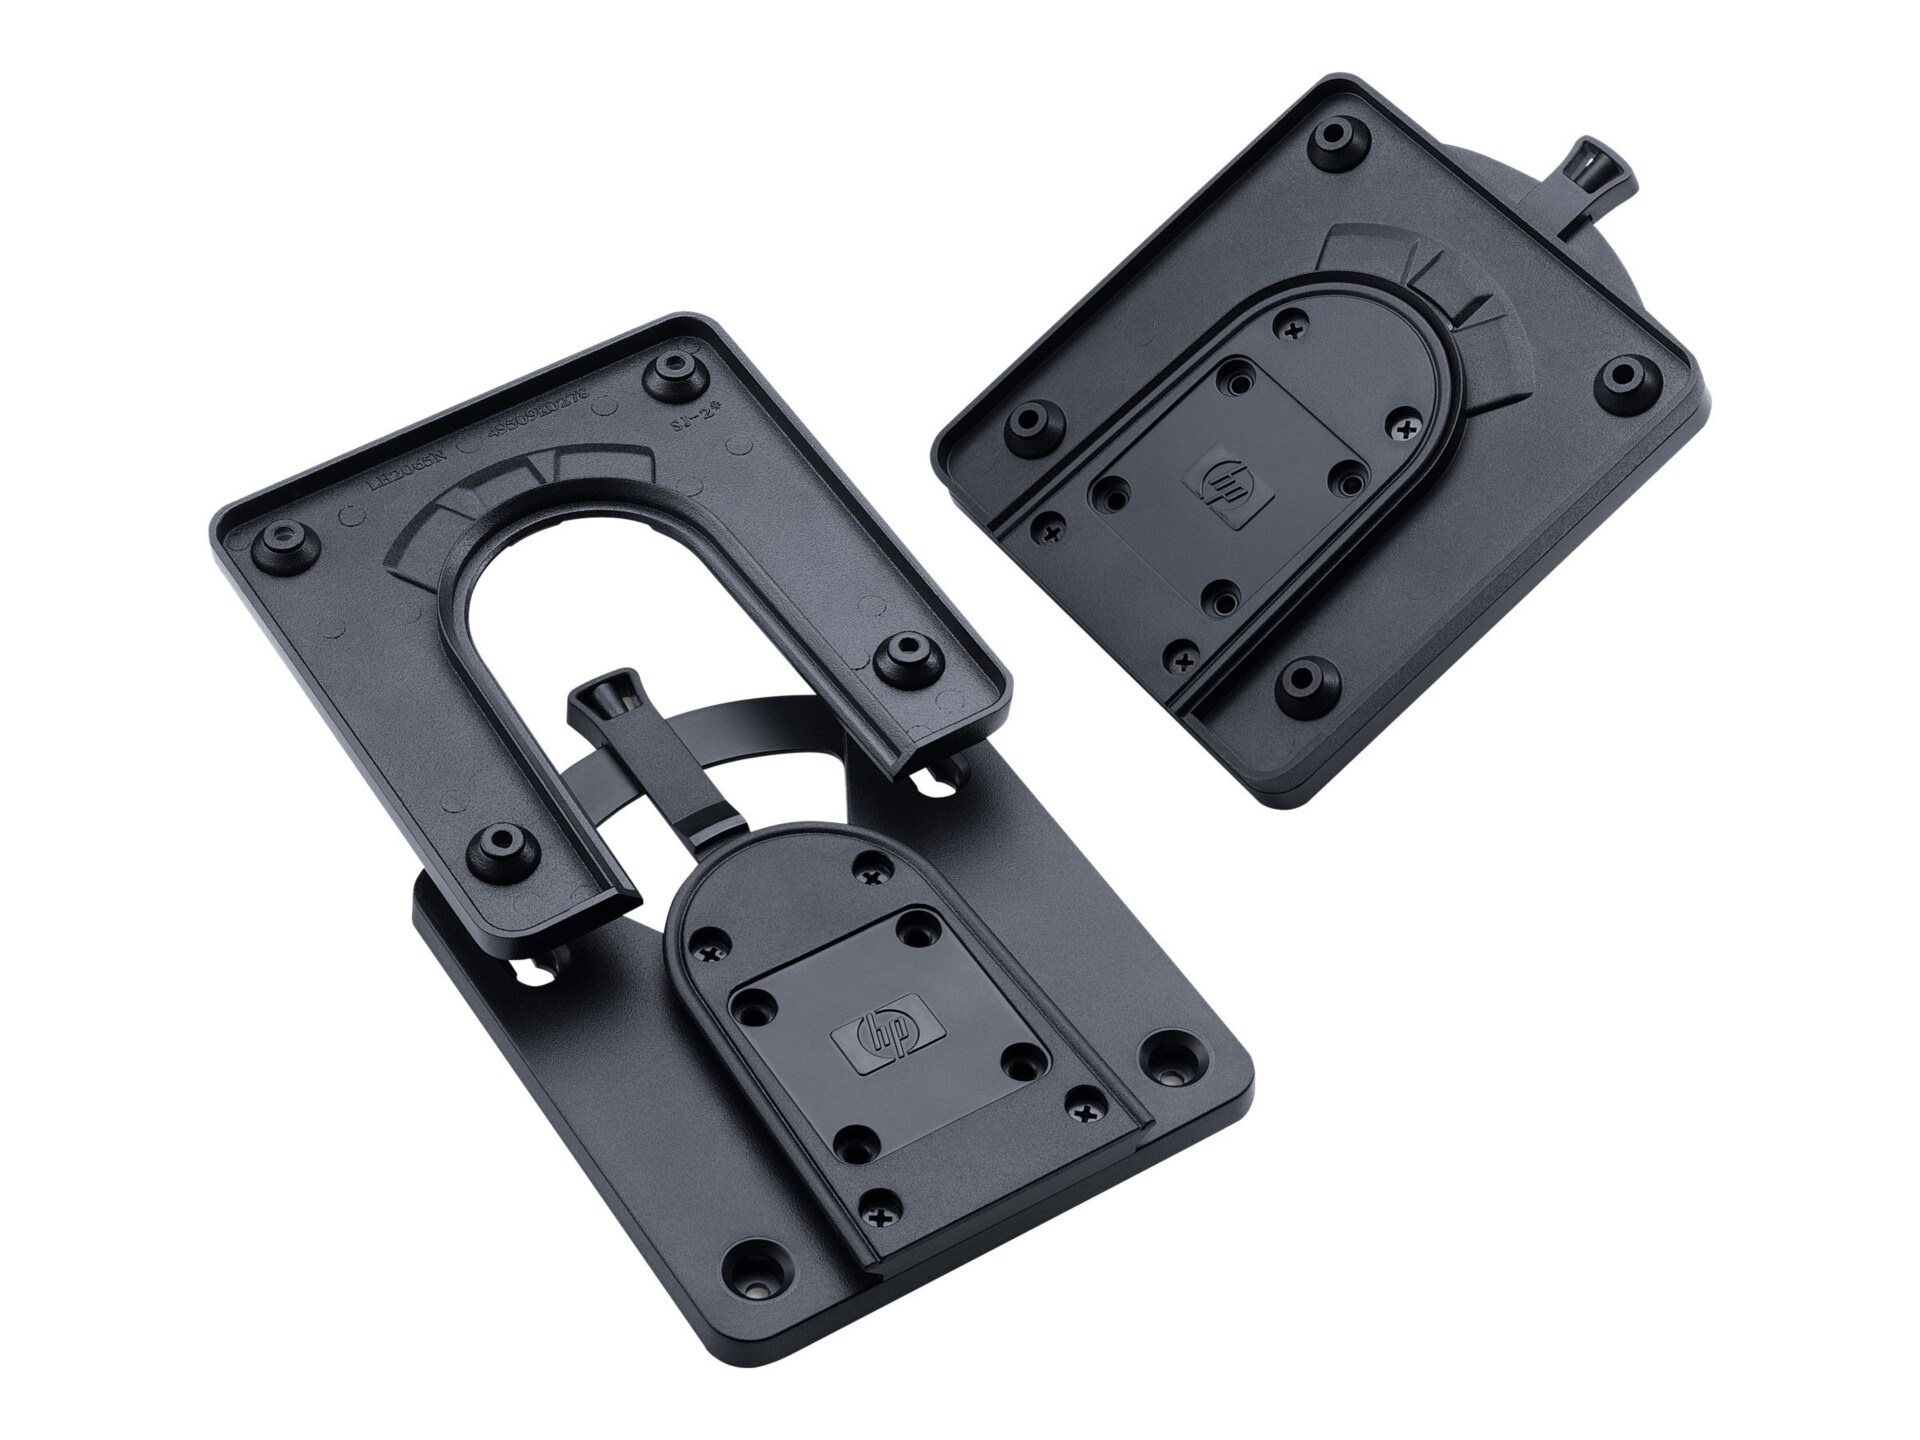 HP LCD Monitor Quick Release Mount